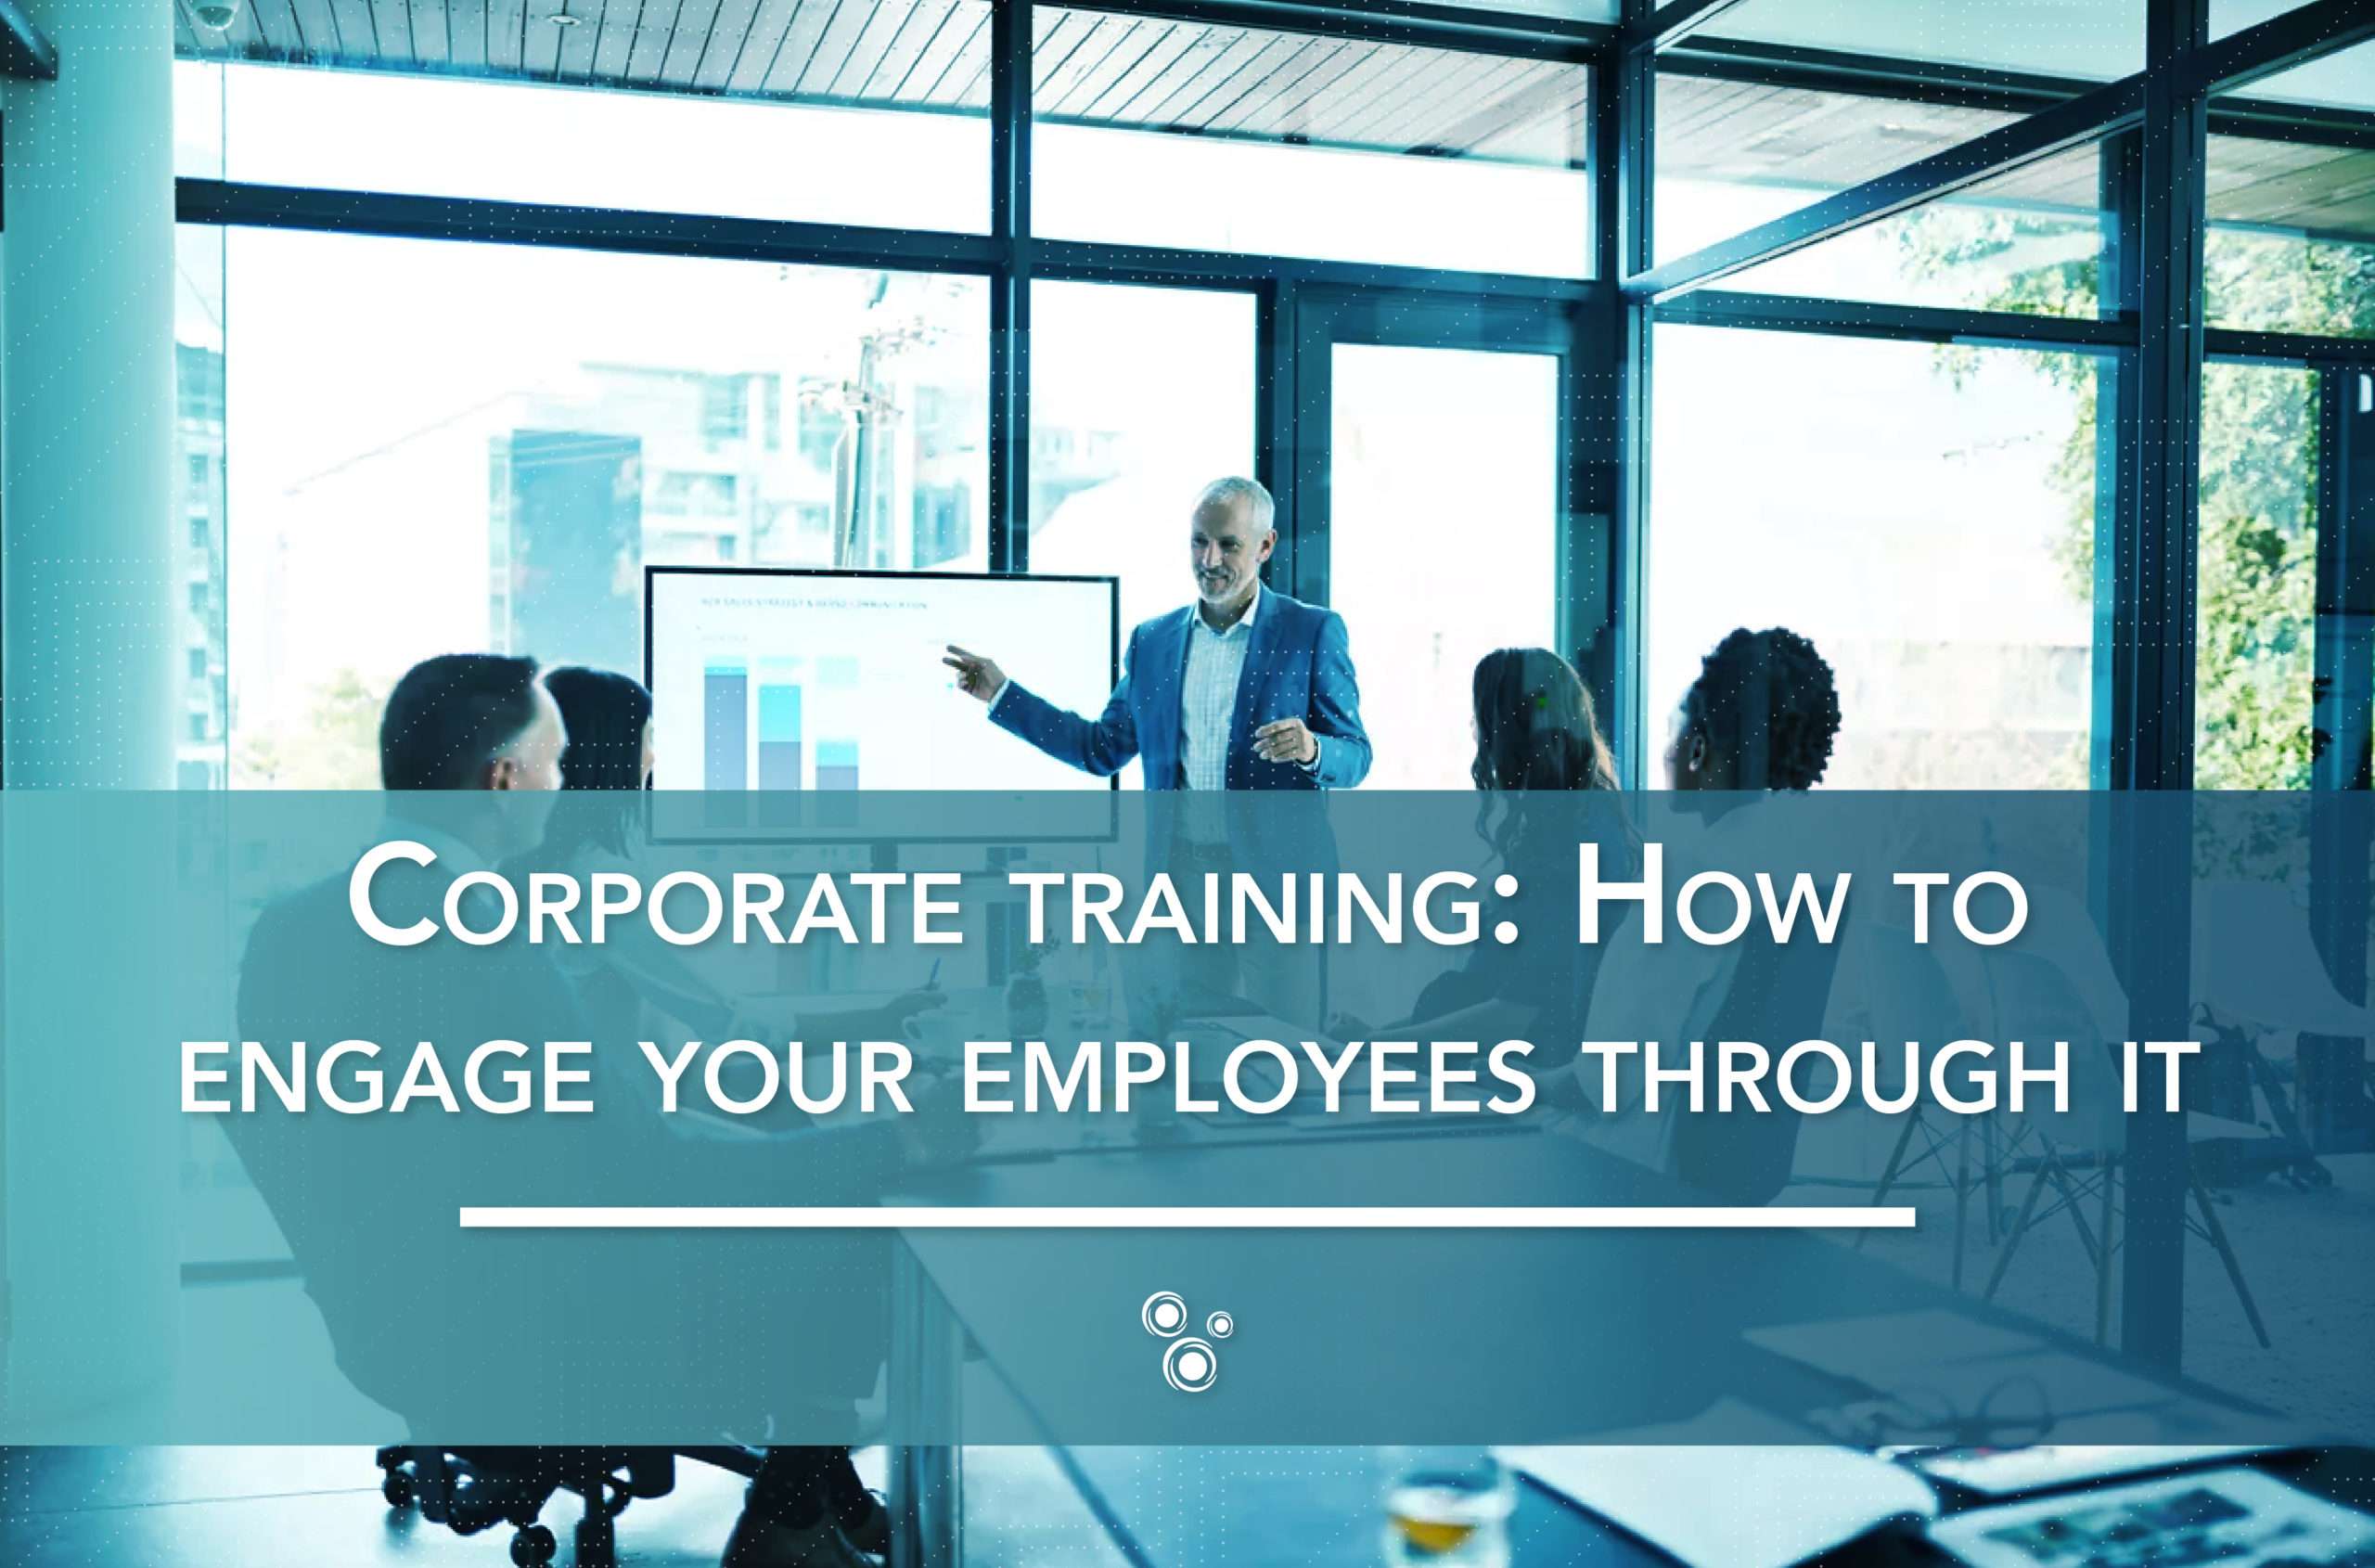 Corporate training: How to engage your employees through it